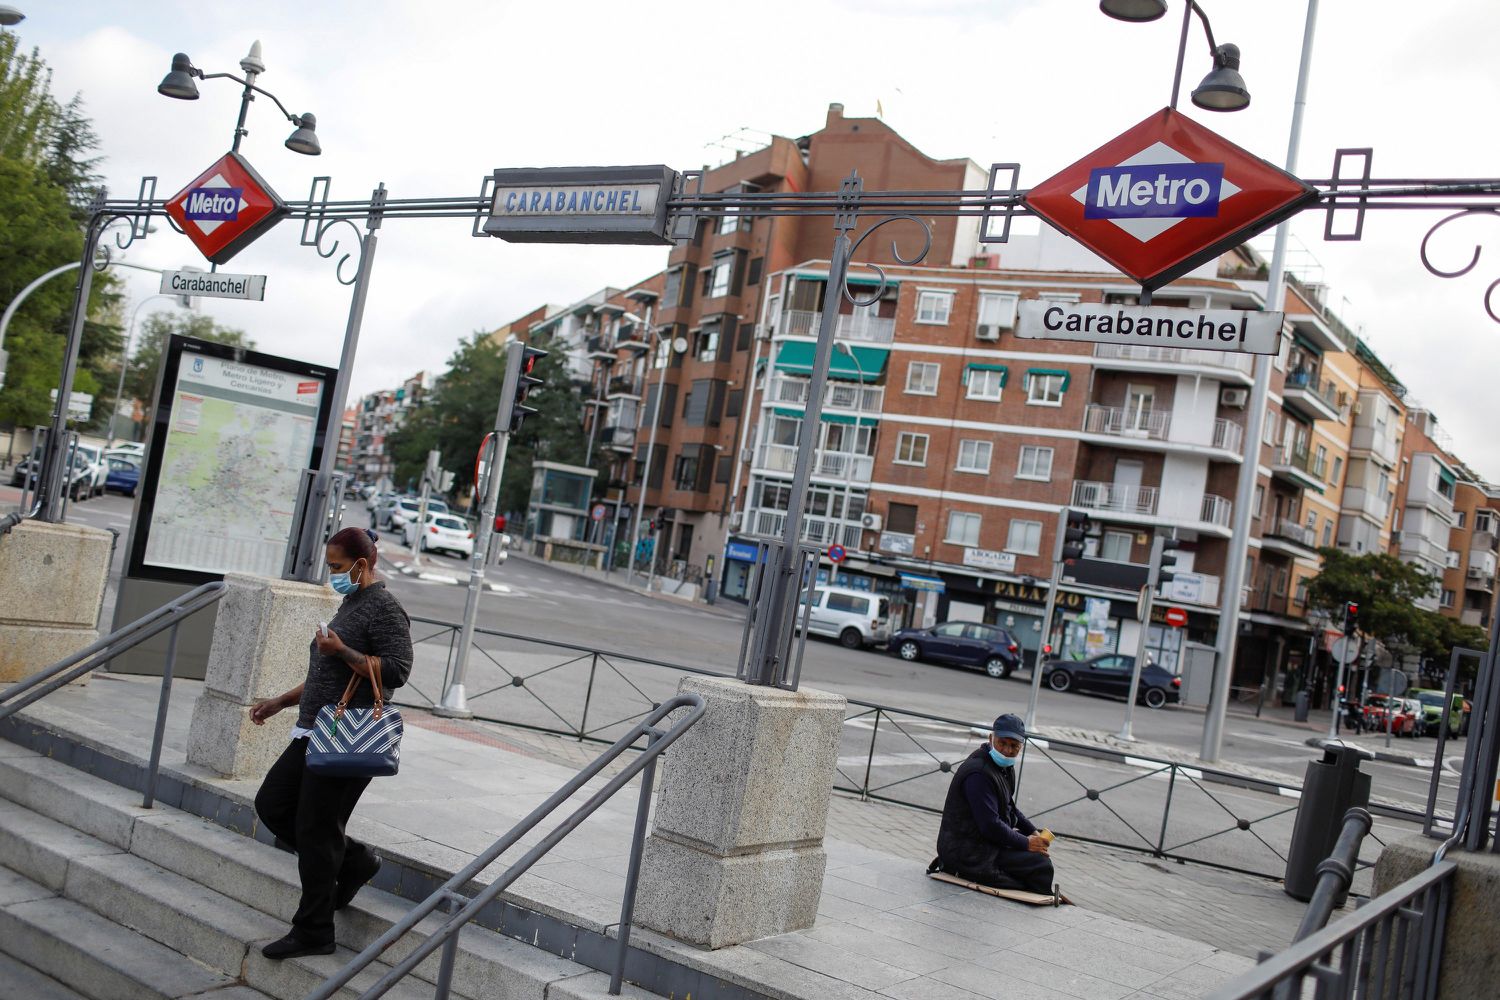 The entrance to the Metro station in Carabanchel, which has been placed under a selective lockdown.